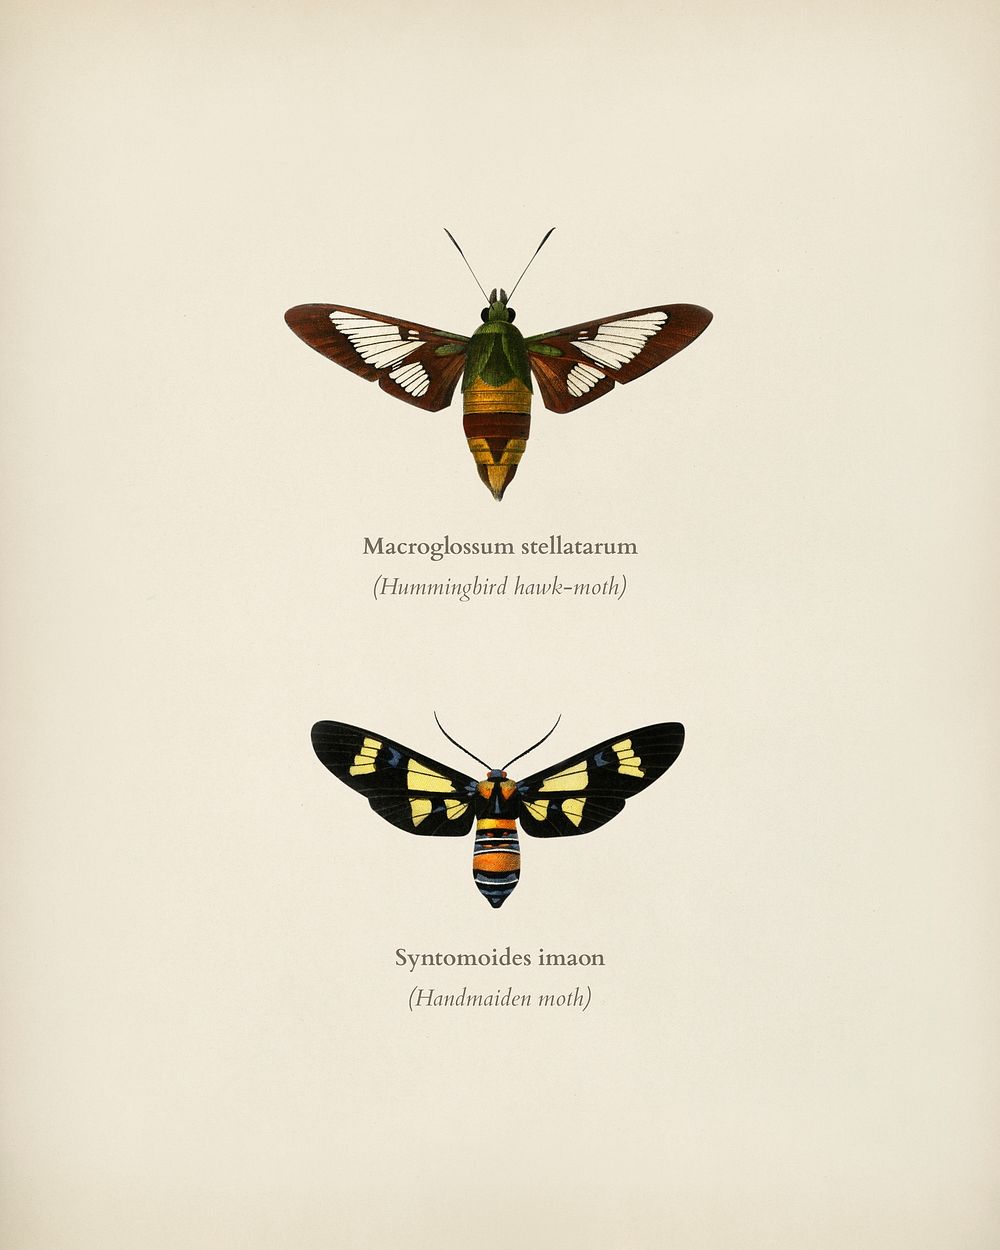 Collection of moths illustrated by Charles Dessalines D' Orbigny (1806-1876). Digitally enhanced from our own 1892 edition…